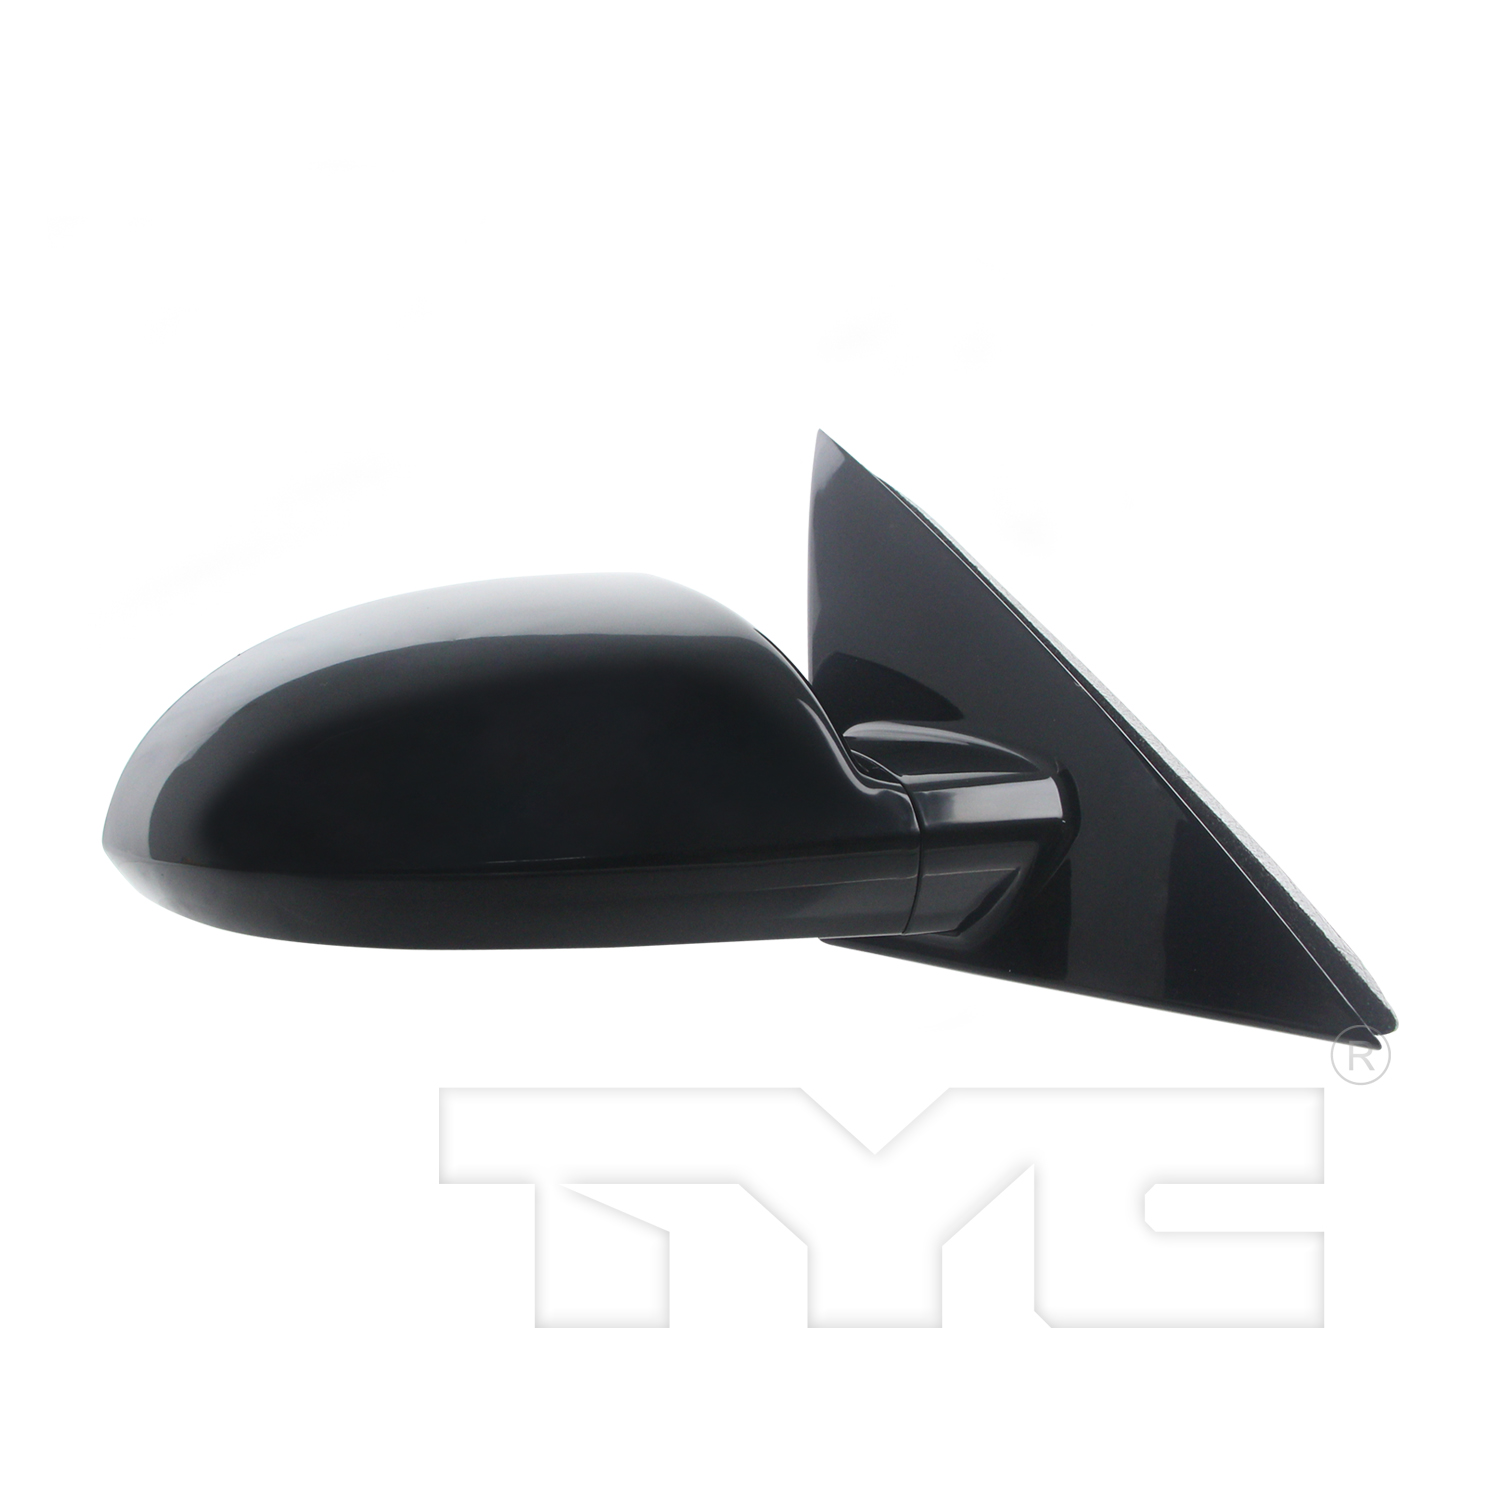 Aftermarket MIRRORS for CHEVROLET - IMPALA LIMITED, IMPALA LIMITED,14-16,RT Mirror outside rear view